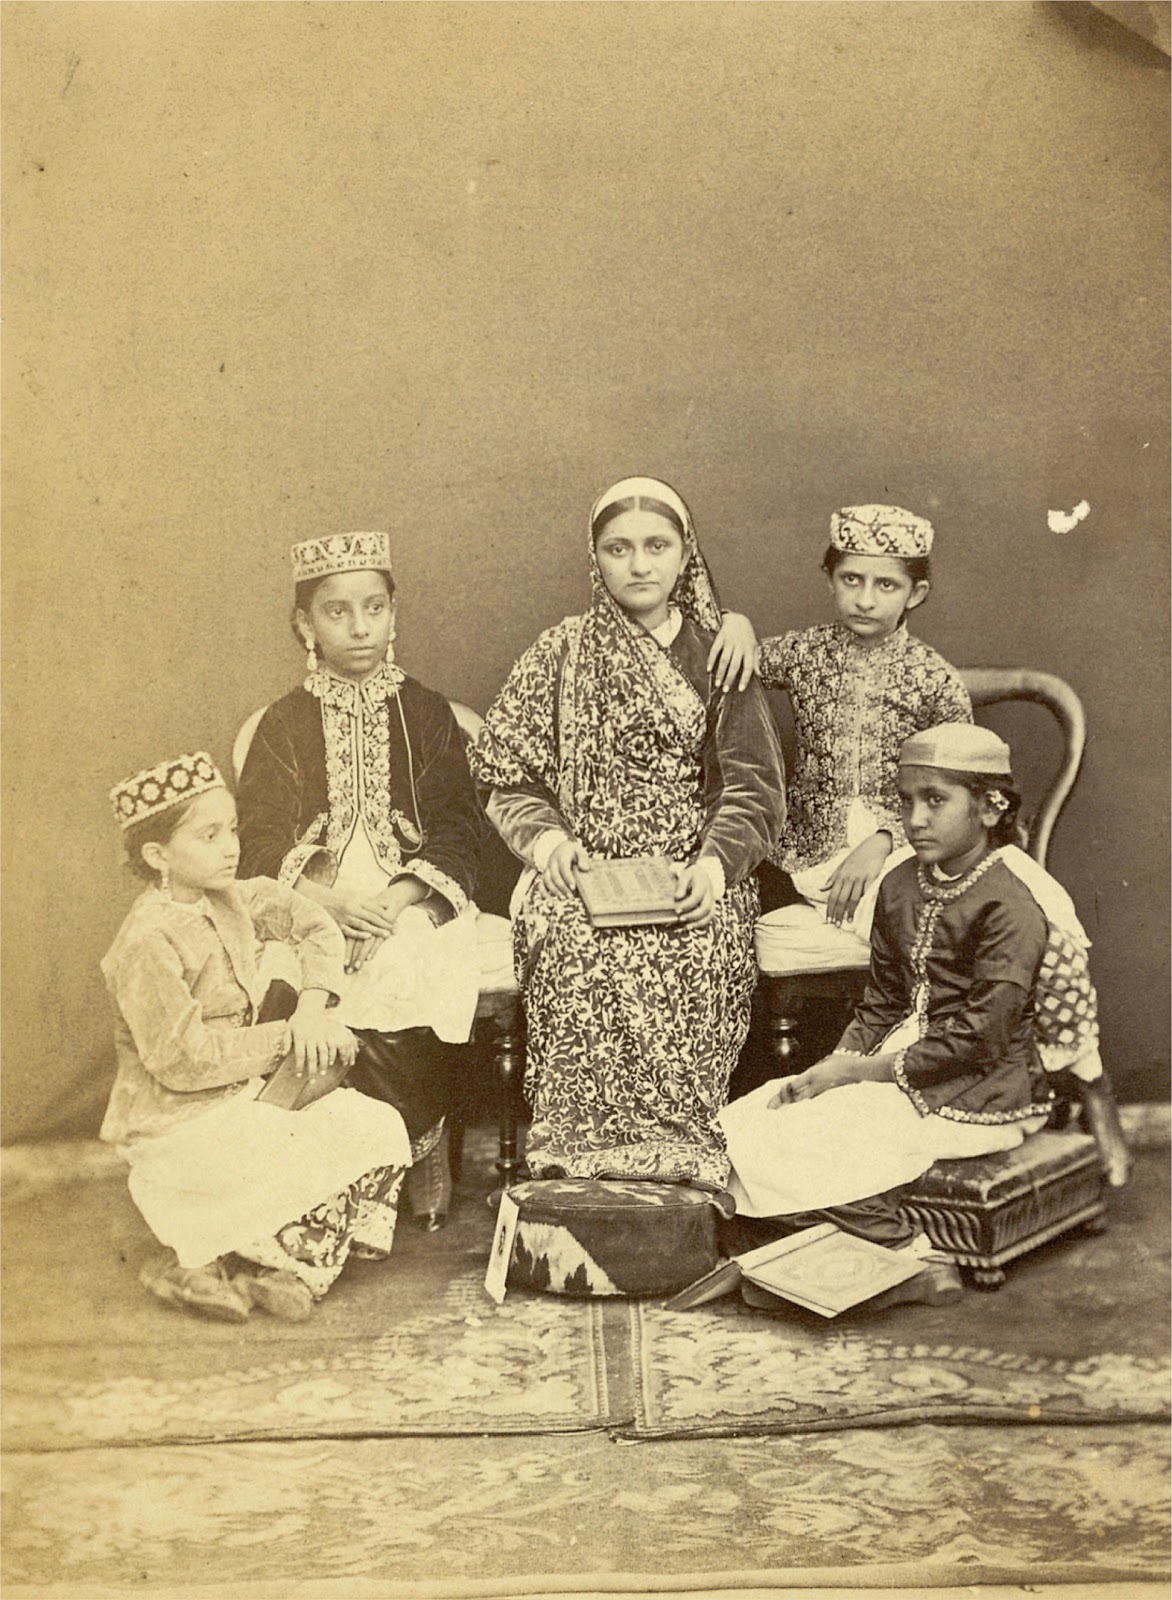 Vintage Photograph of a Group of Students in the Alexandra Native Girls' Institution at Bombay (Mumbai) 1873